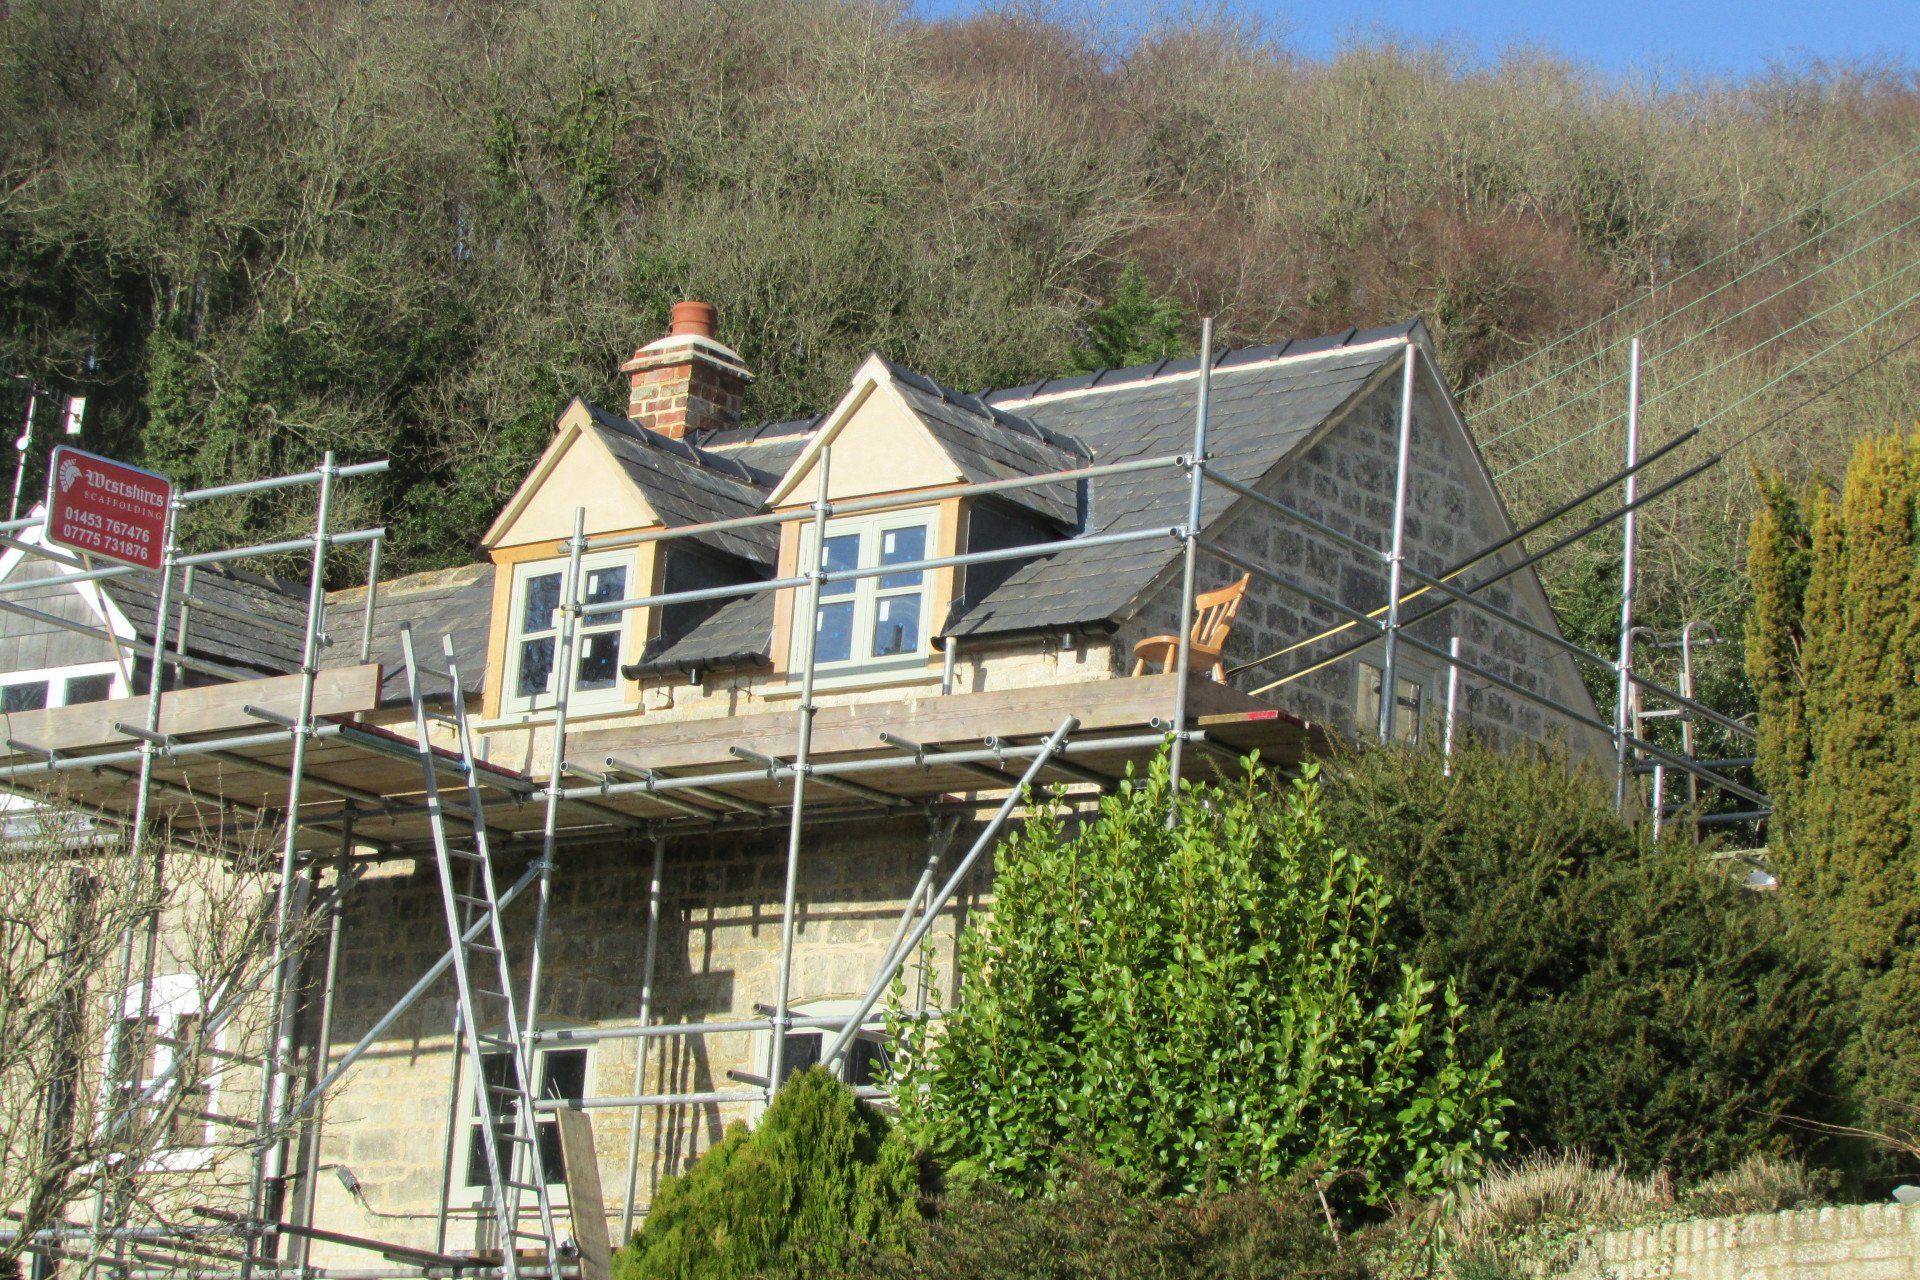 Cotswold stone roofing being repaired by Westshire Roofing in Stroud